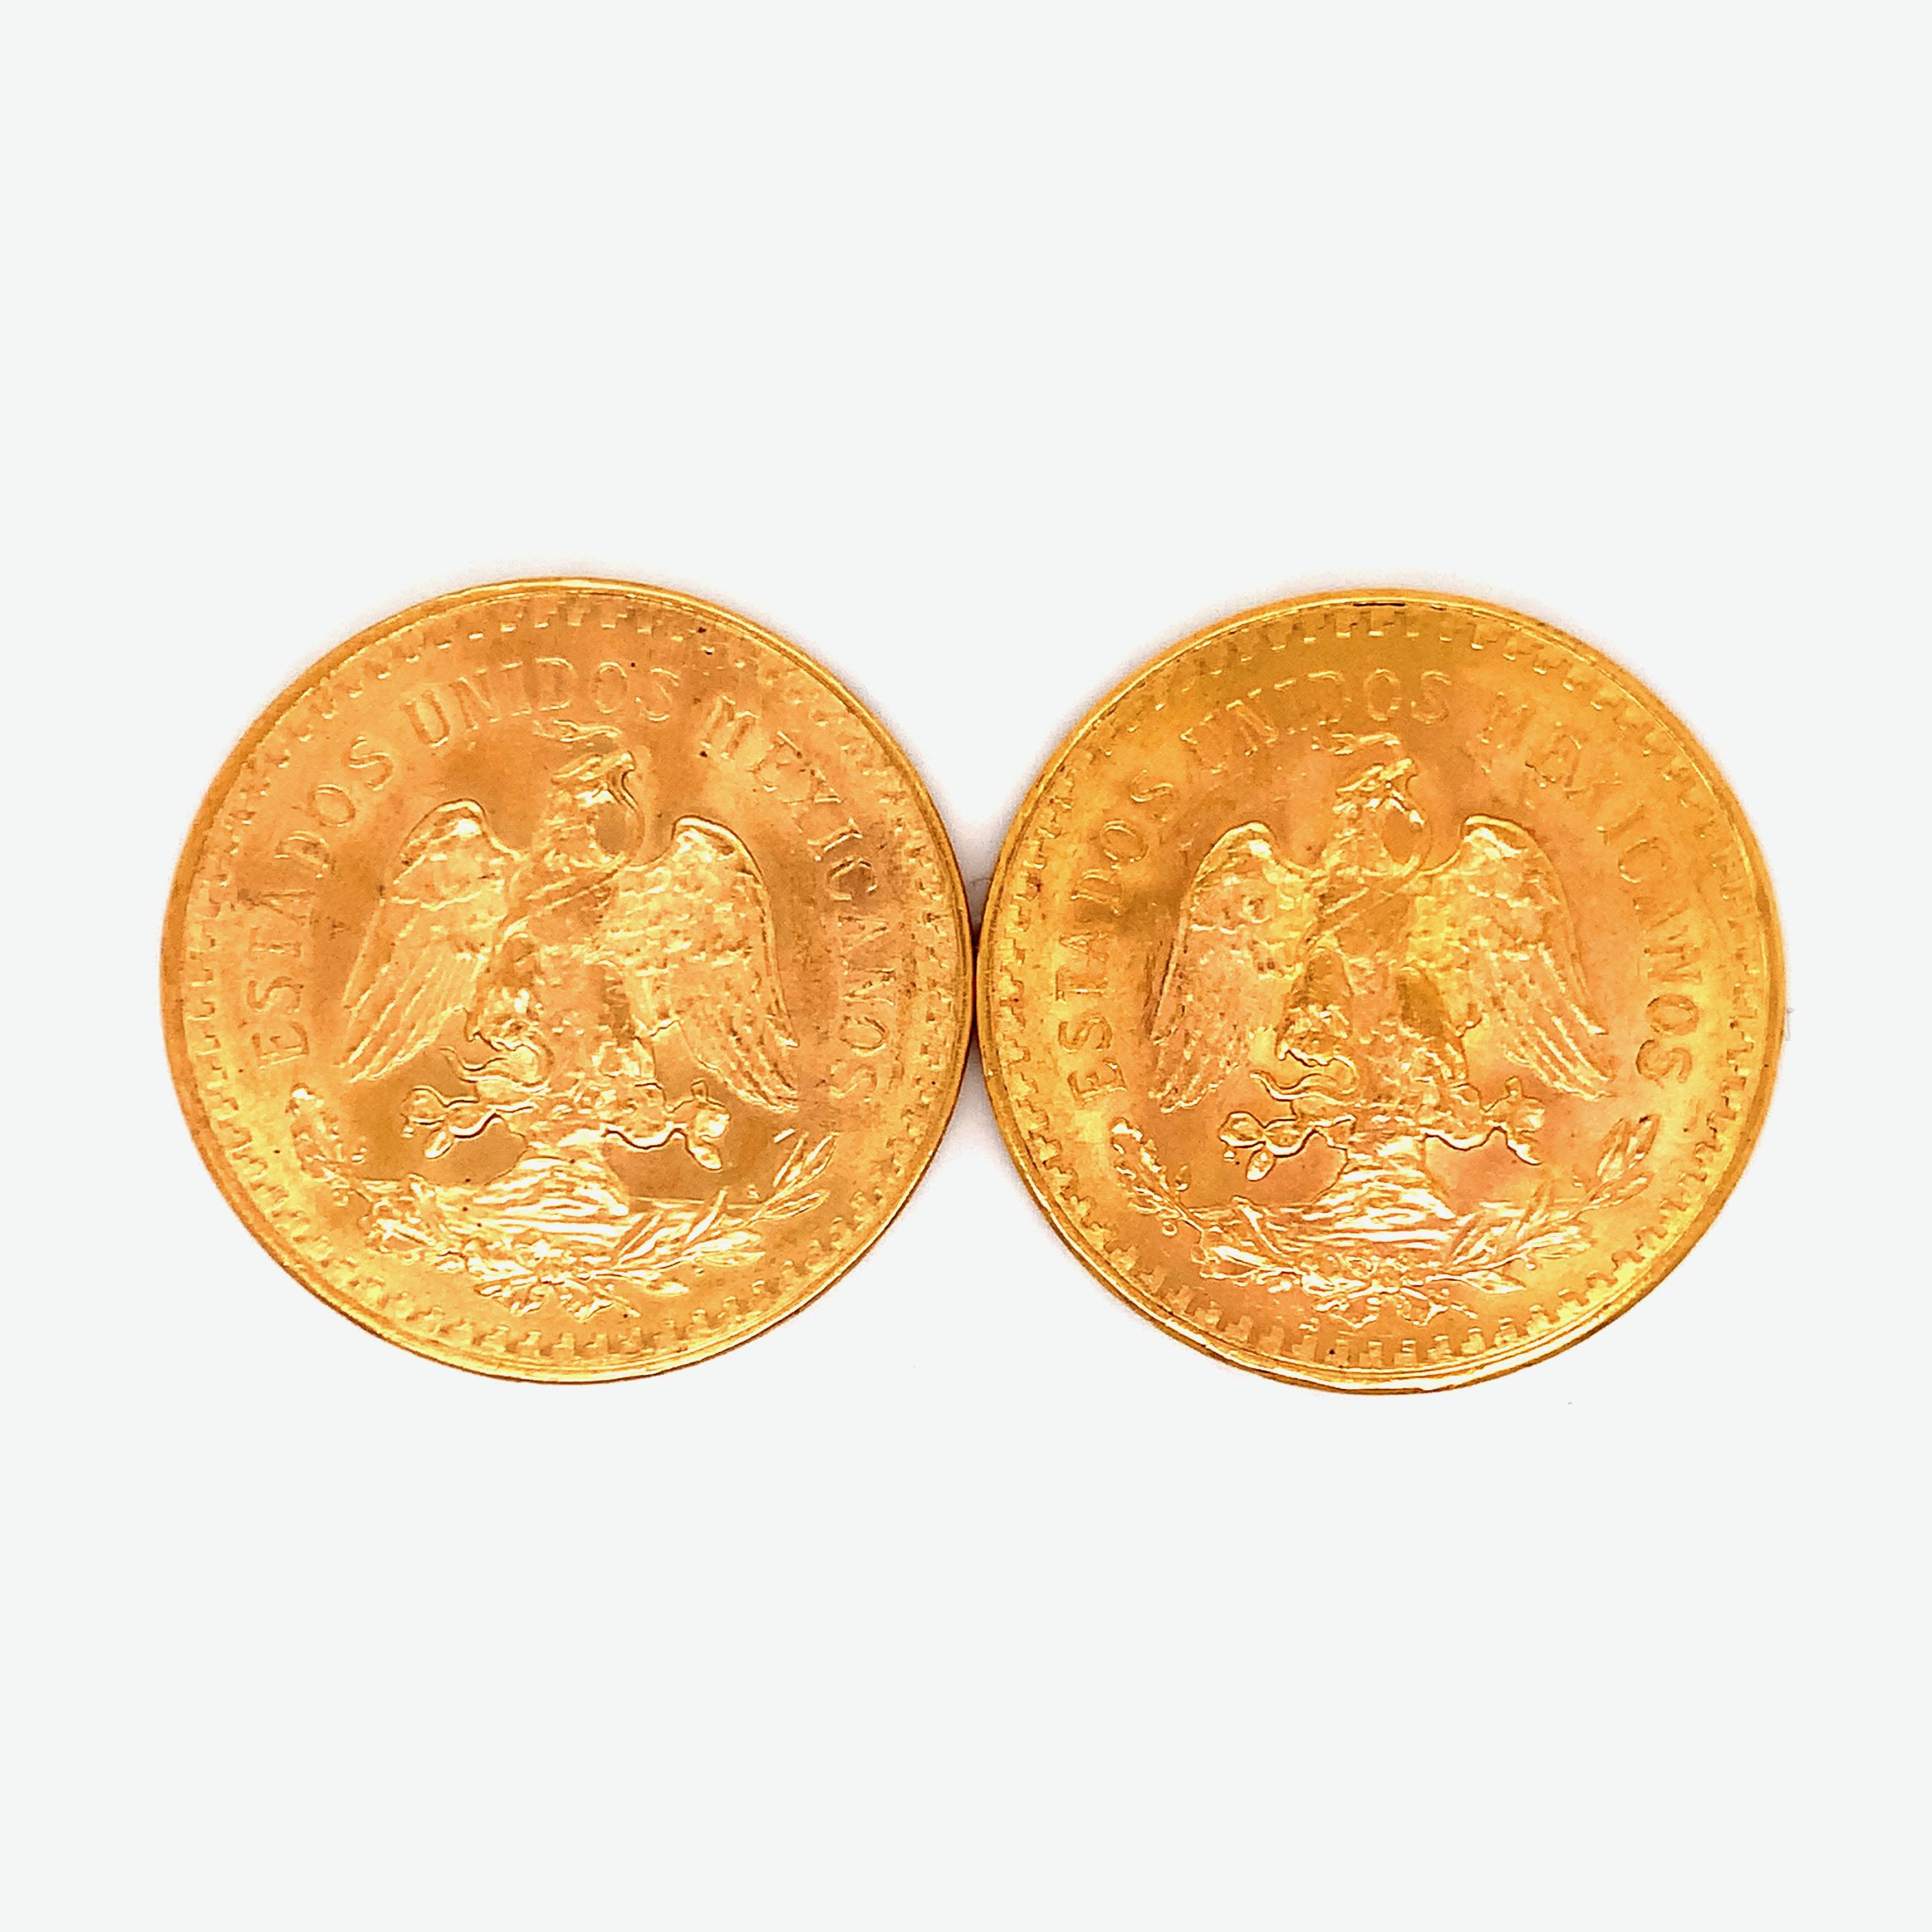 A set of two 50 pesos gold coins from Mexico, marked 1946 and 1947. The front of each gold coin features 